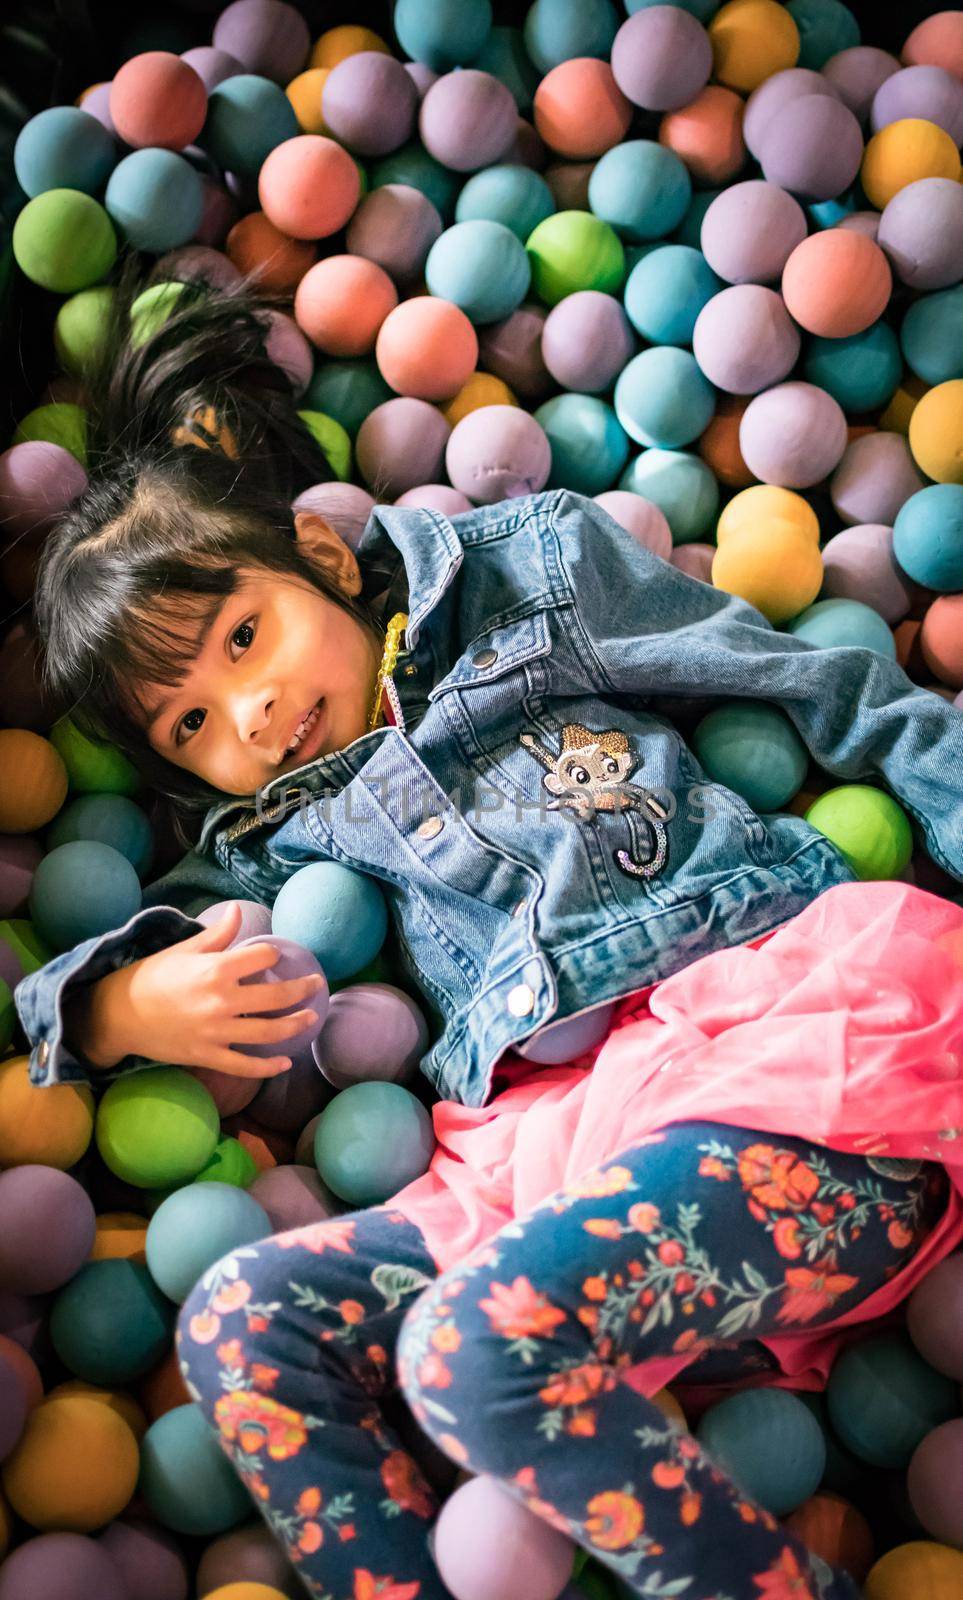 Little asian girl having fun in ball pit with colorful balls. Child playing on indoor playground. Kid jumping in ball pool.